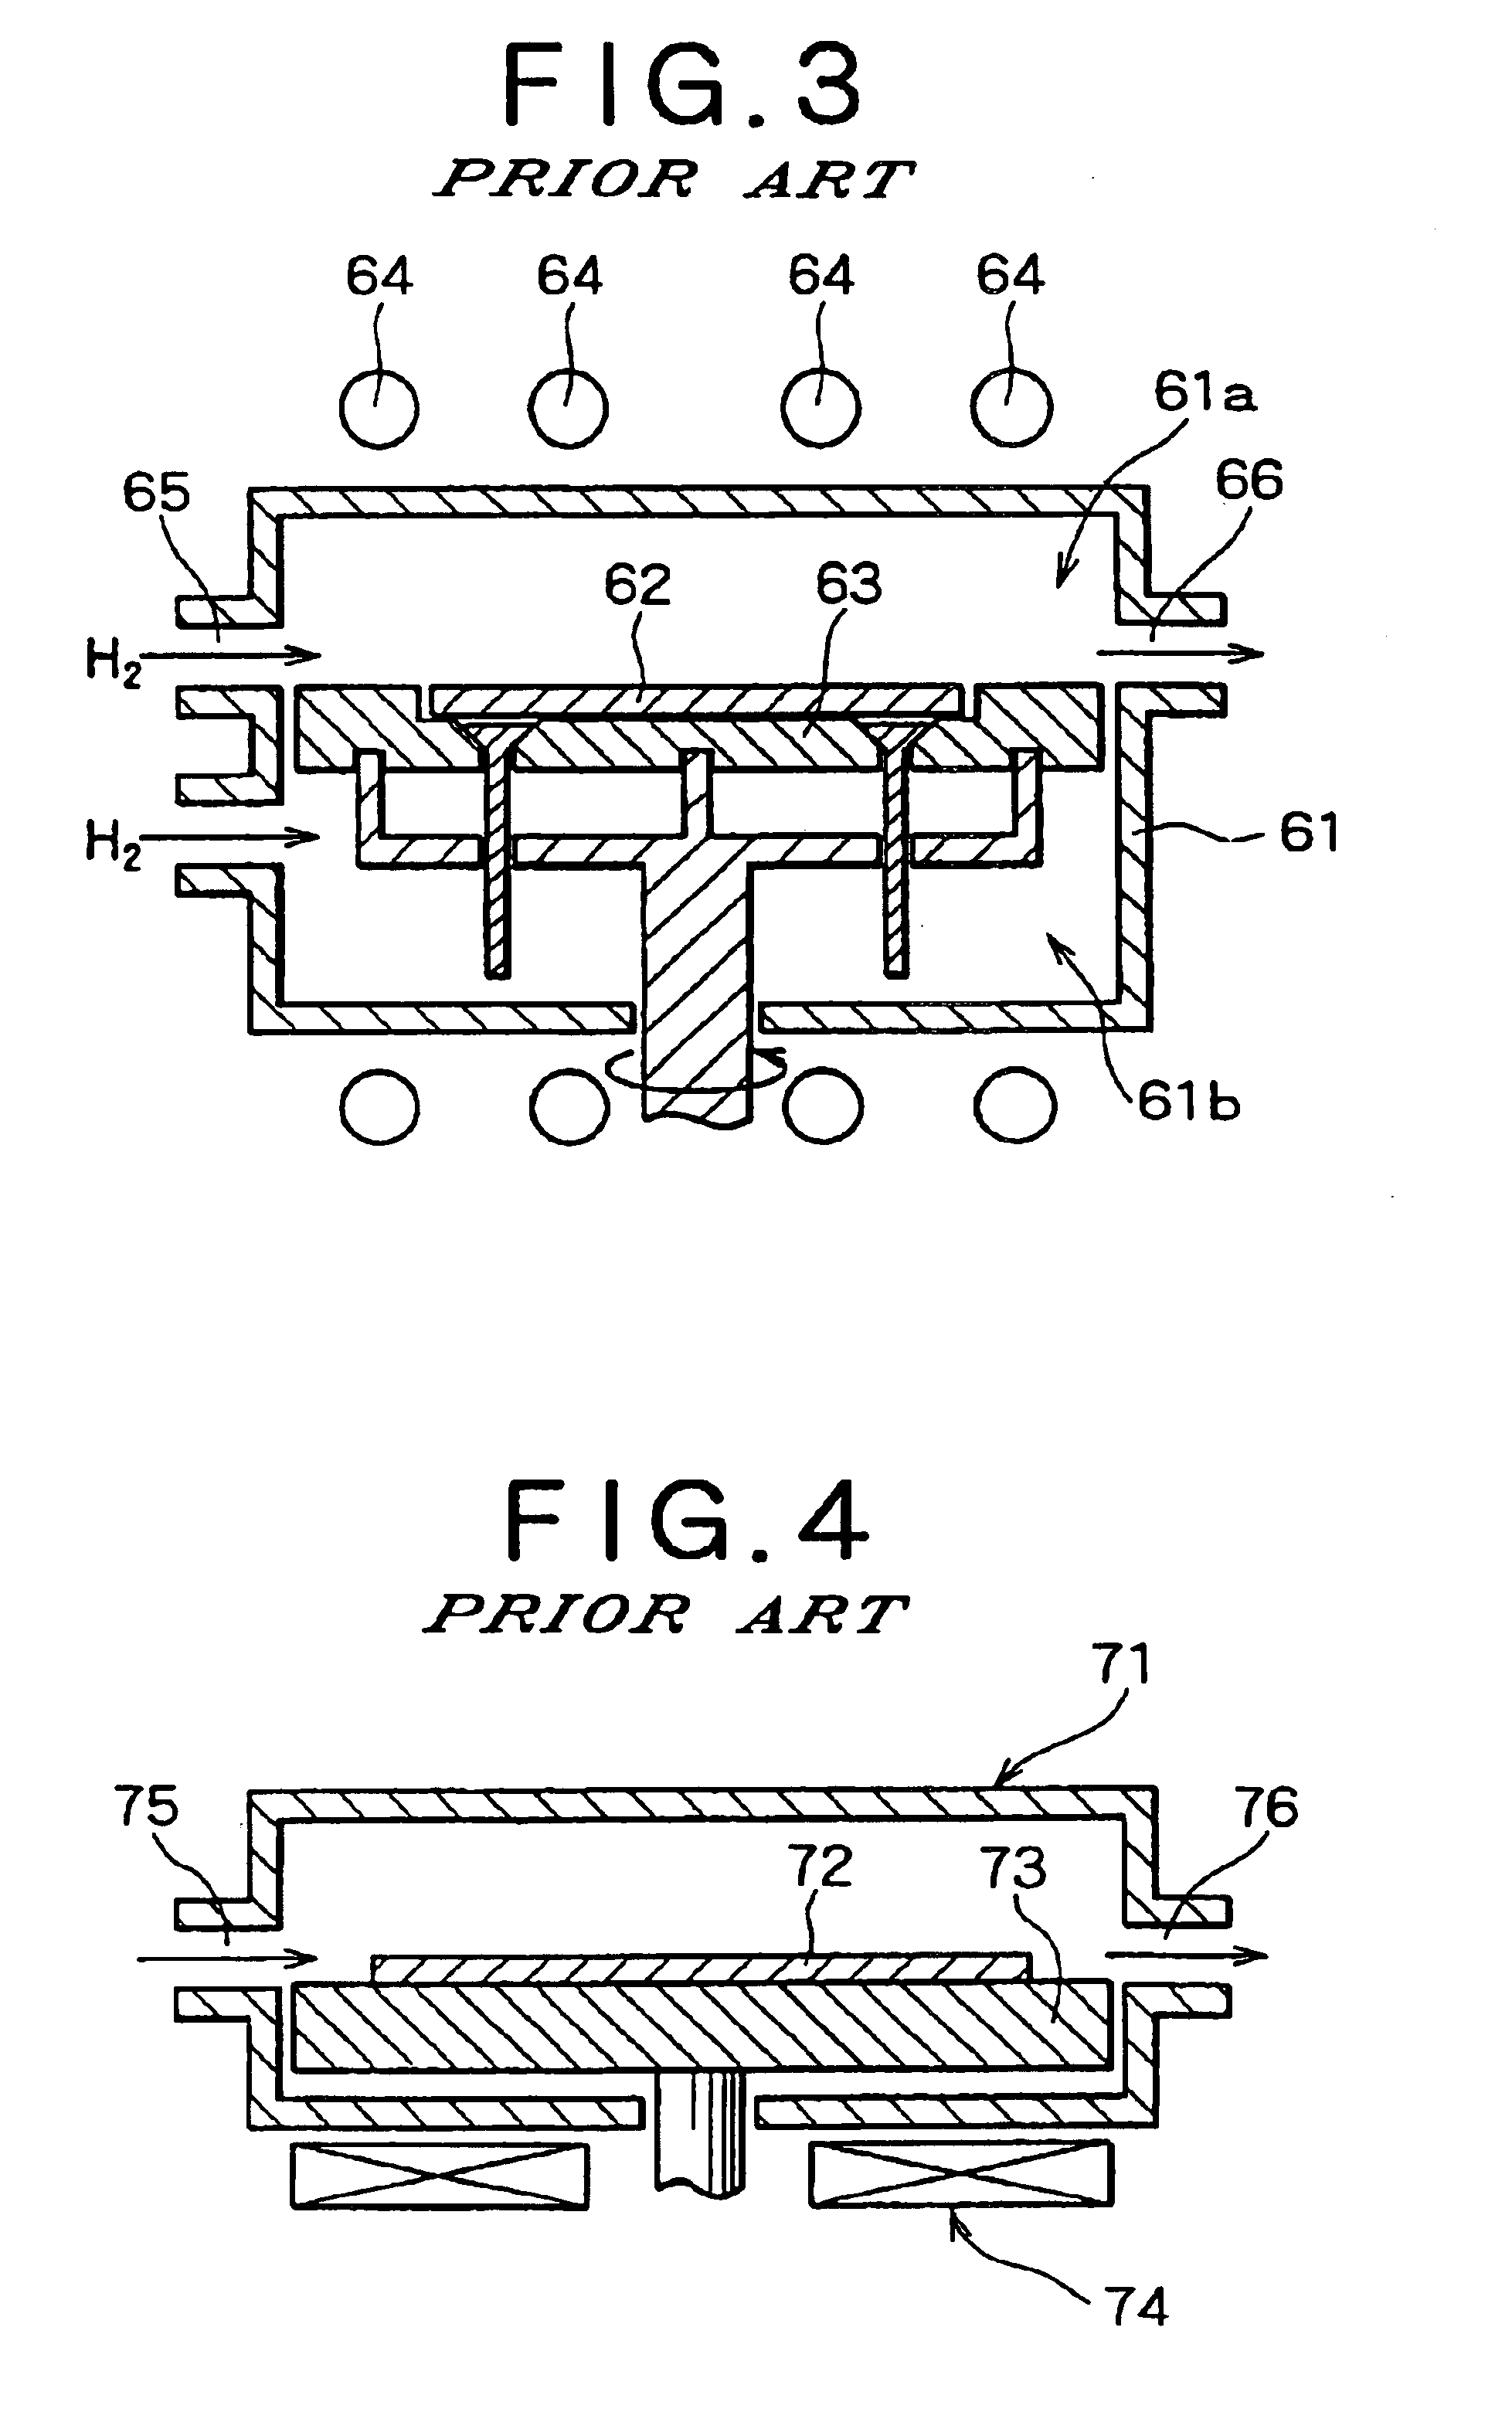 Heating apparatus using induction heating